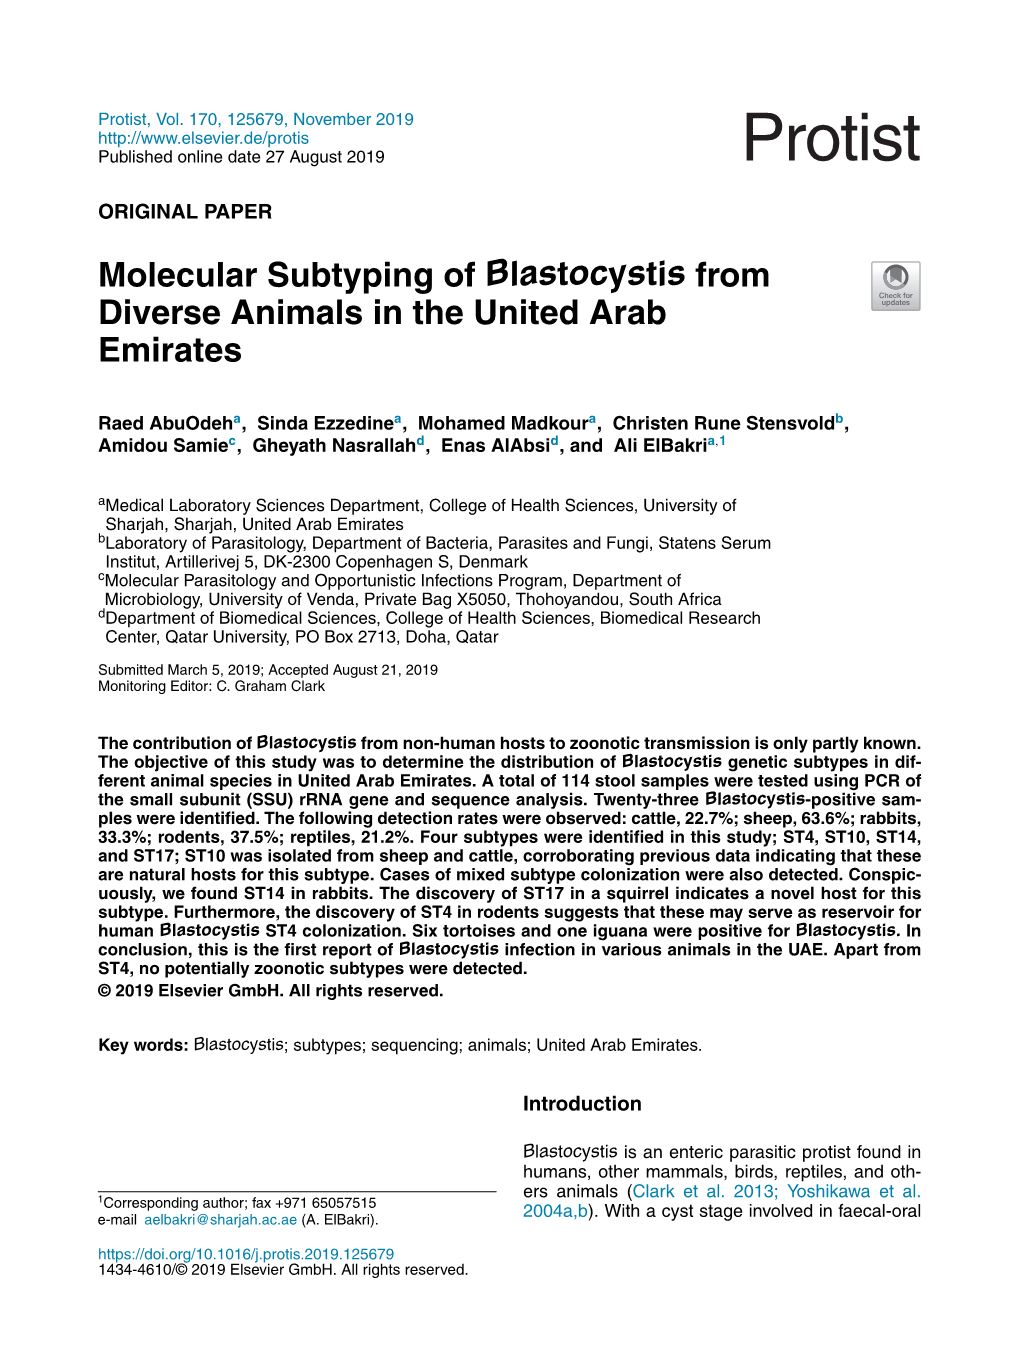 Molecular Subtyping of Blastocystis from Diverse Animals in the United Arab Emirates